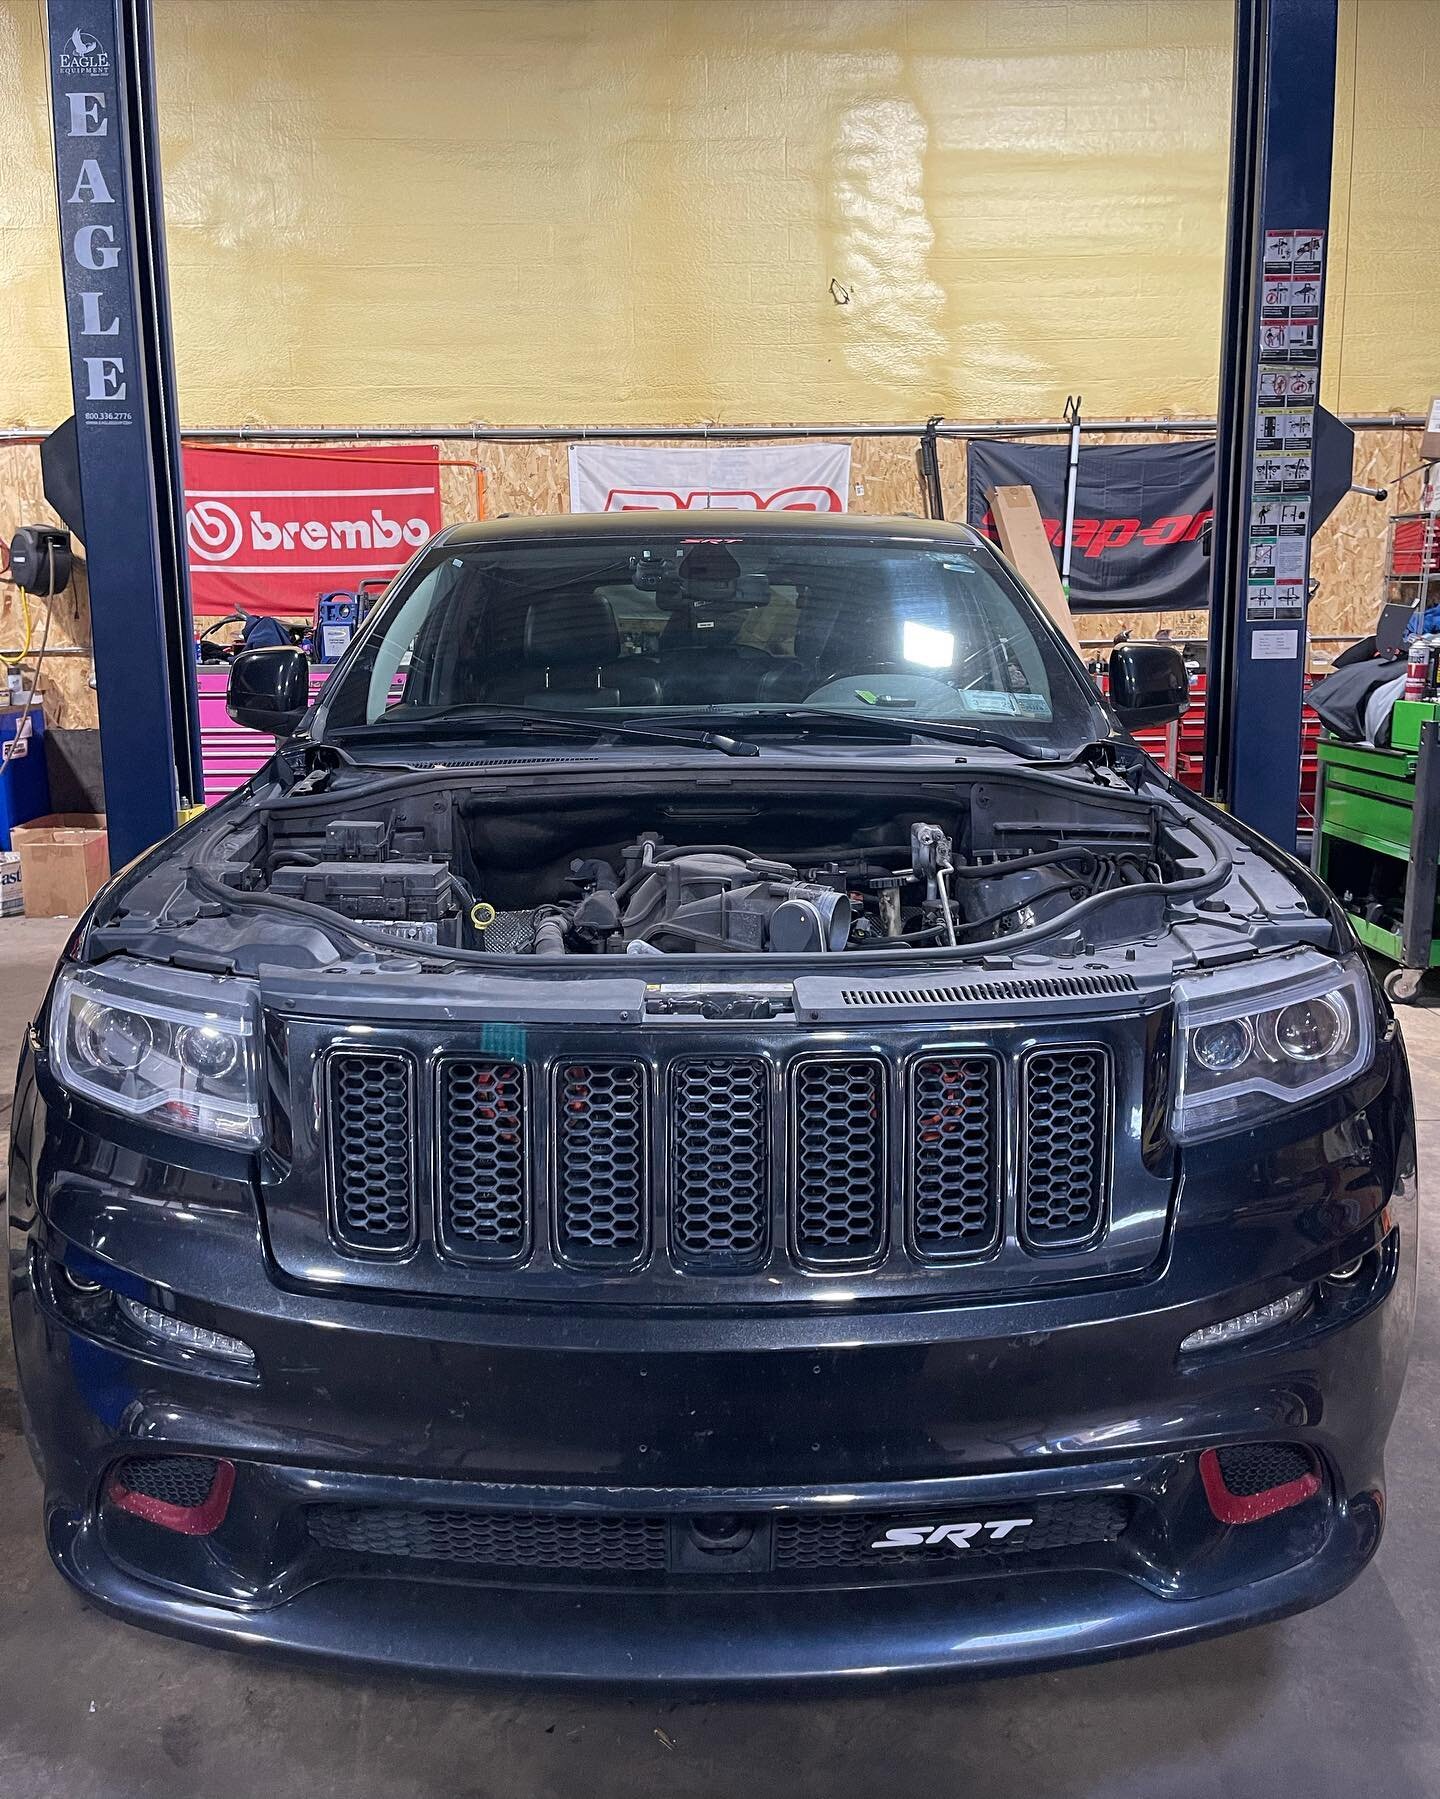 SRT8 Jeep going under the knife. 
.
.
.
#srt8 #jeep #performance #performanceshop #cam #local #ny #smallbusiness #repair #dynotuning #tuningshop #mustangdyno